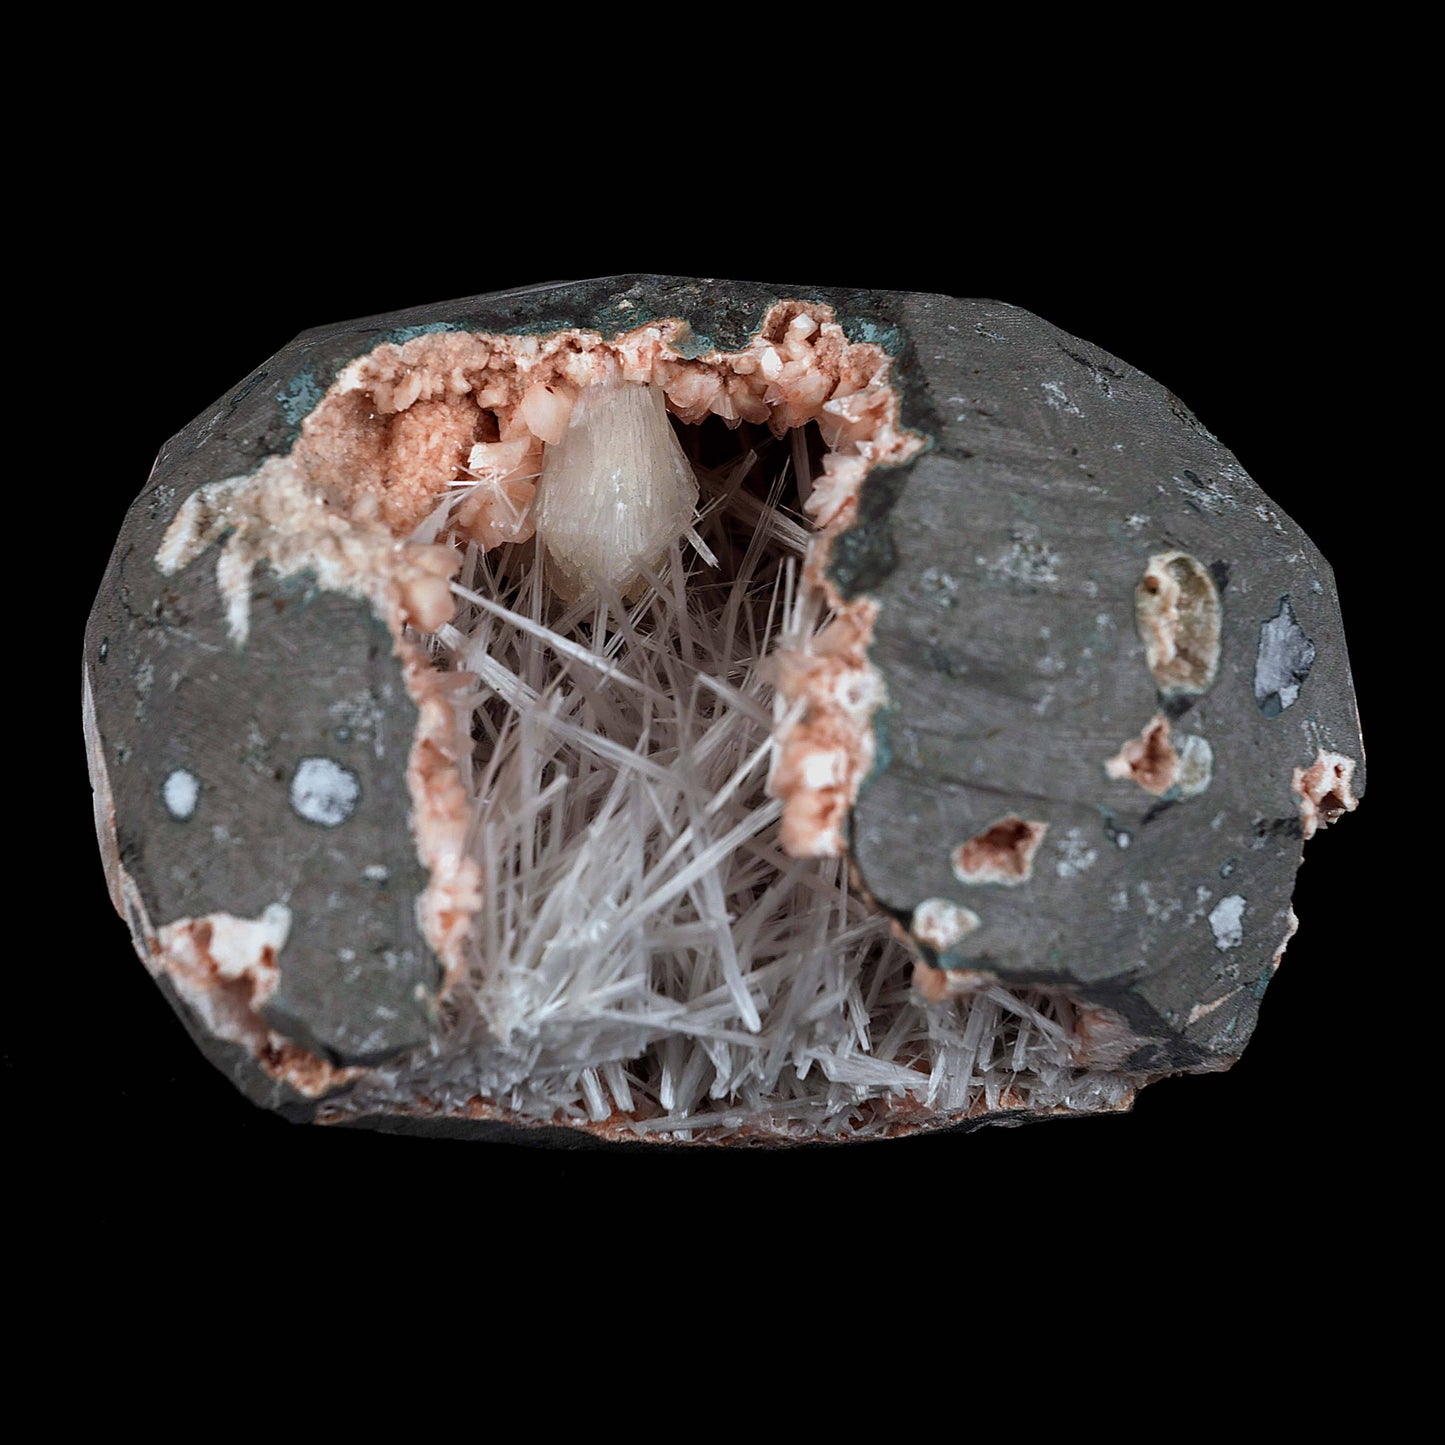 Scolecite With Stilbite Inside Heulandite Geode Natural Mineral Specim…  https://www.superbminerals.us/products/scolecite-with-stilbite-inside-heulandite-geode-natural-mineral-specimen-b-4543  Features:A huge Geode with beige Heulandite crystals and a conspicuous radial spray of glossy, colourless, extremely transparent, acicular (needle-like) Scolecite crystals throughout, as well as numerous solitary Scolecite crystals. Simply breathtaking - the crystal structure, lustre, contrast, and symmetry 